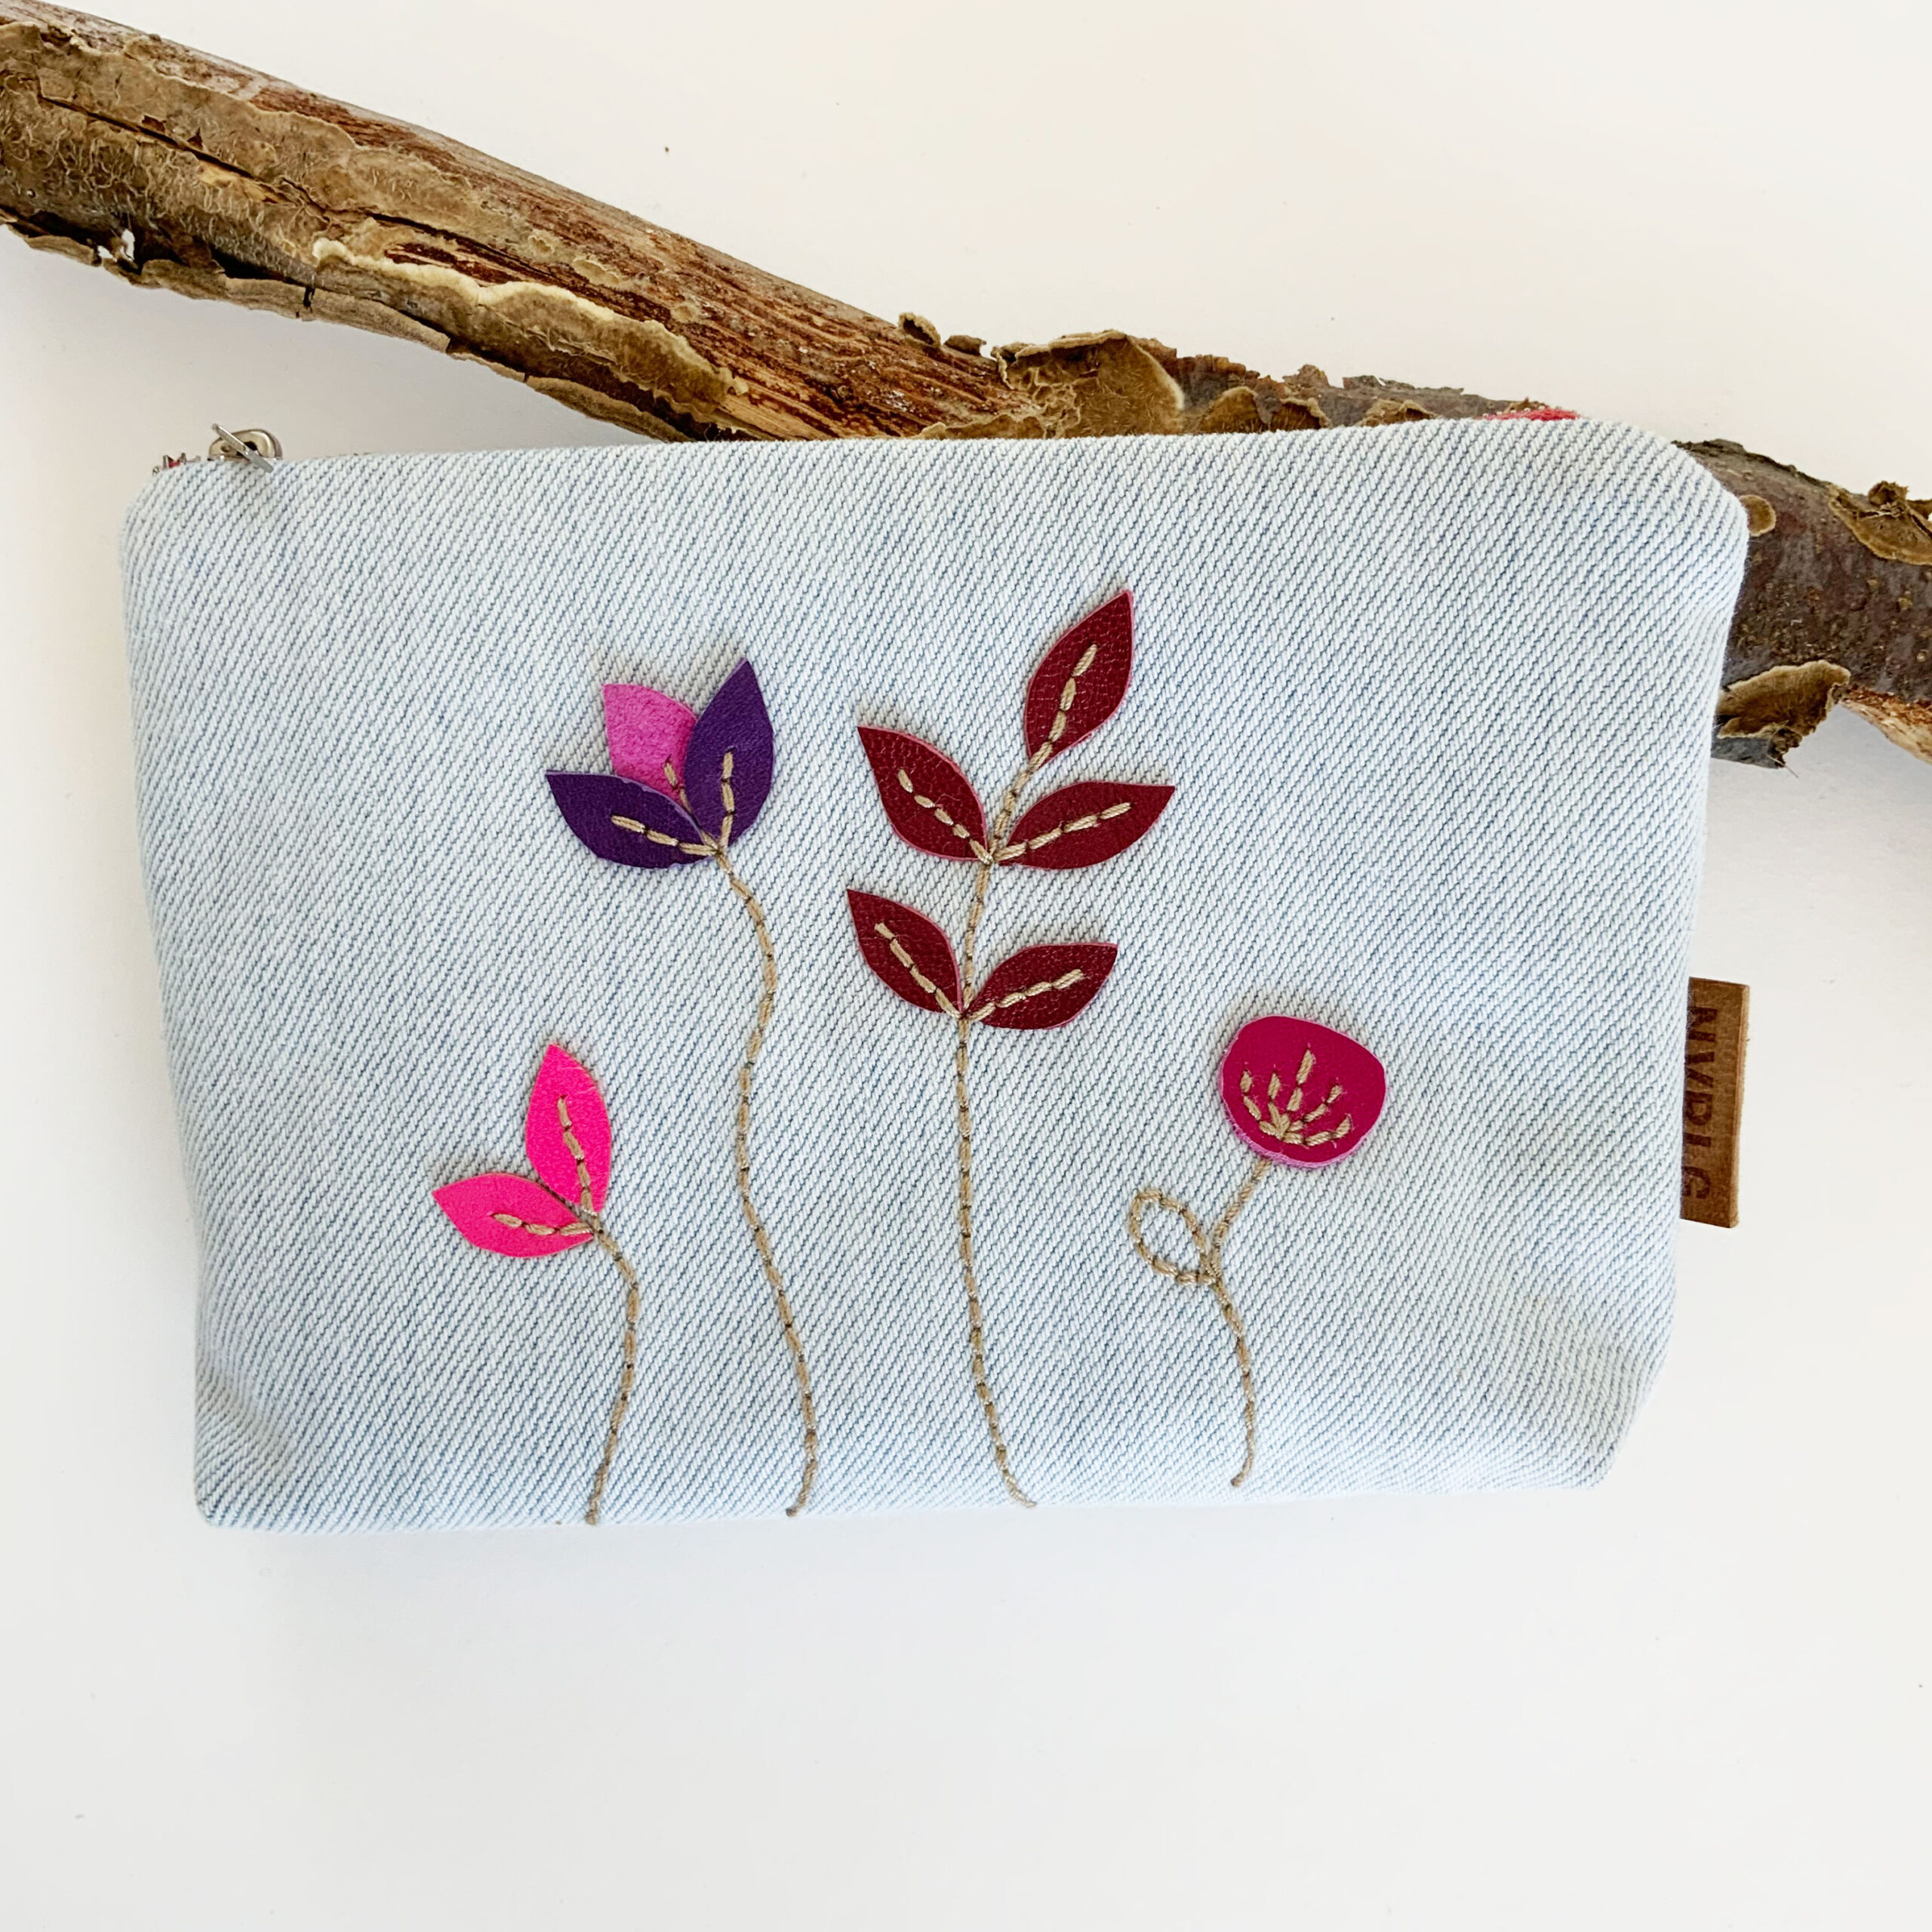 NVRLG-handmade-light-blue-upcycled-denim-small-pouch-pink-magenta-purple-flower-hand-embroidery-floral-leather-applique